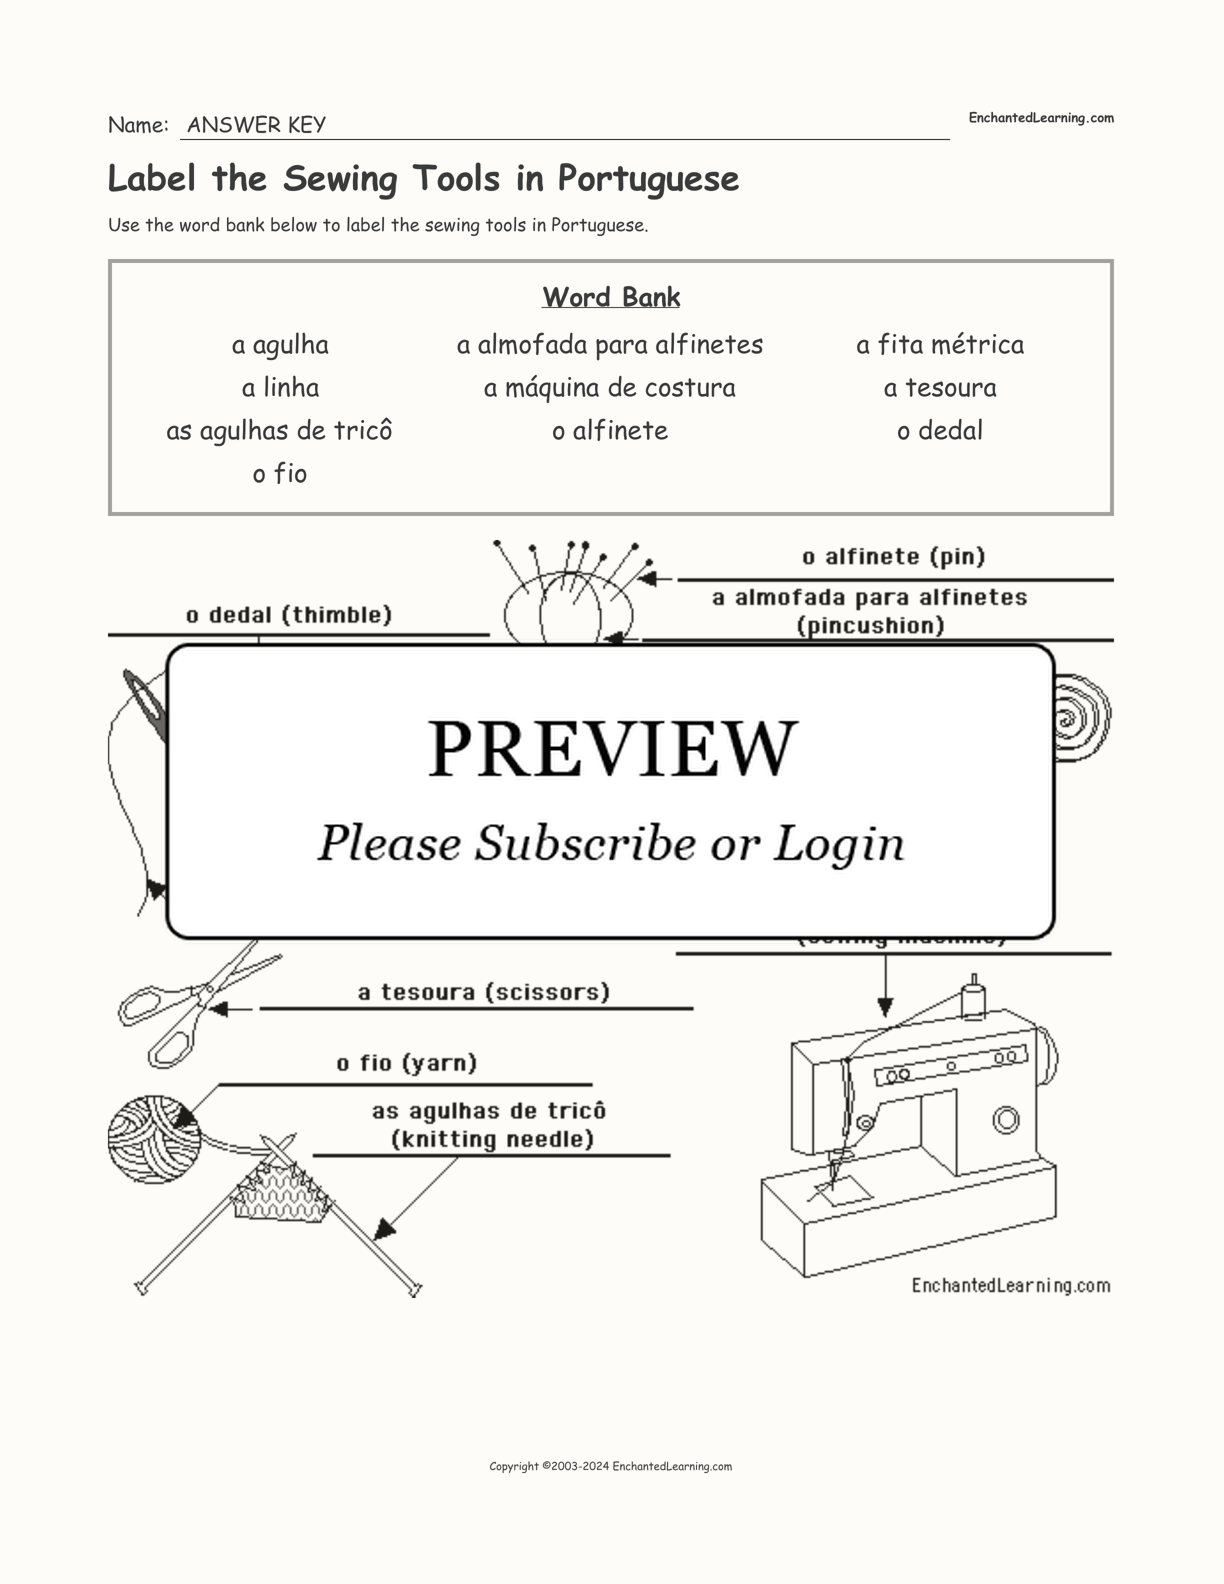 Label the Sewing Tools in Portuguese interactive worksheet page 2